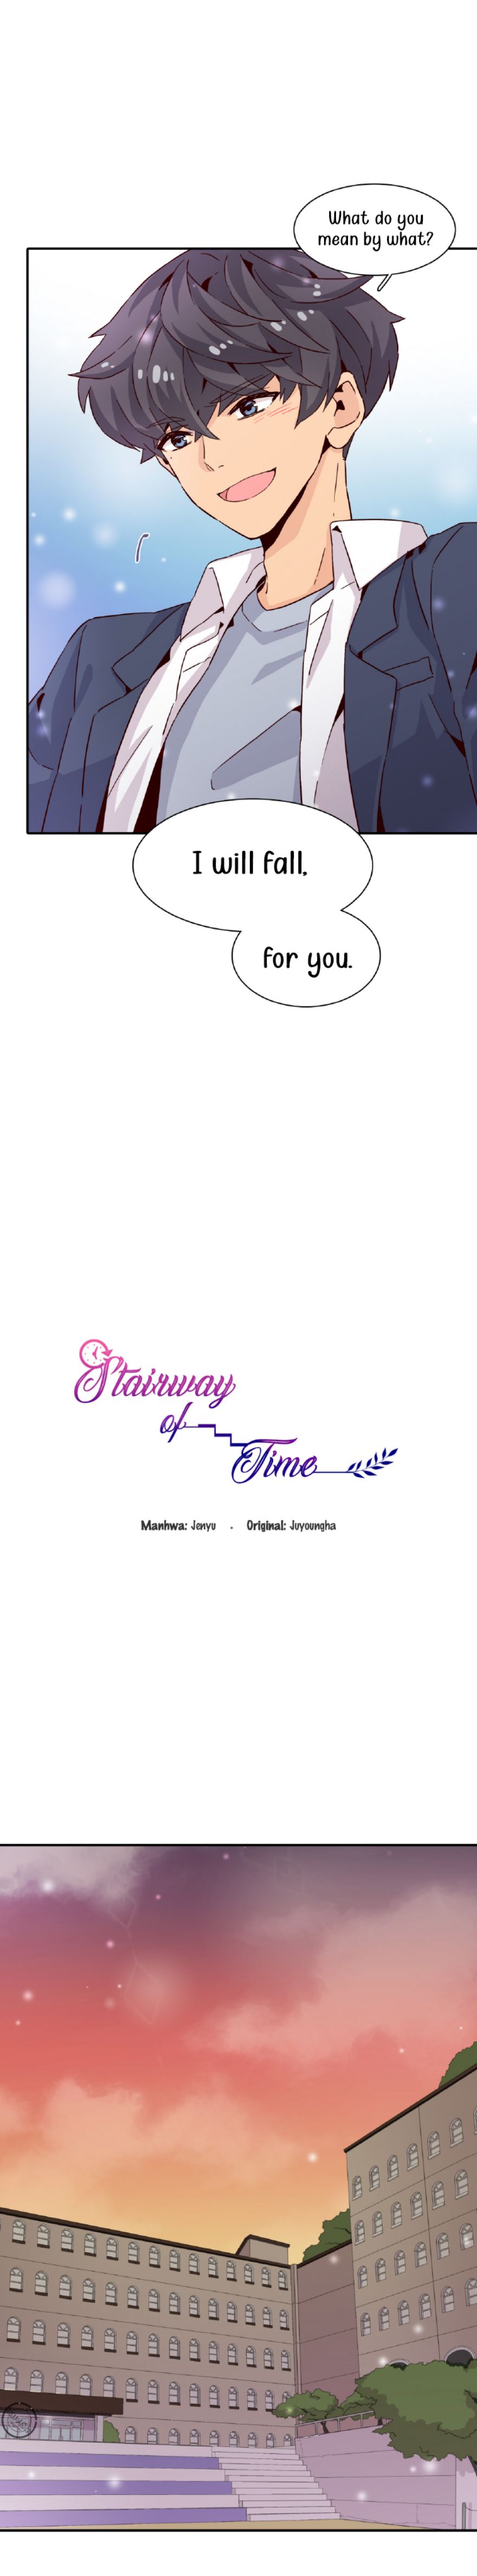 Stairway Of Time - Page 3